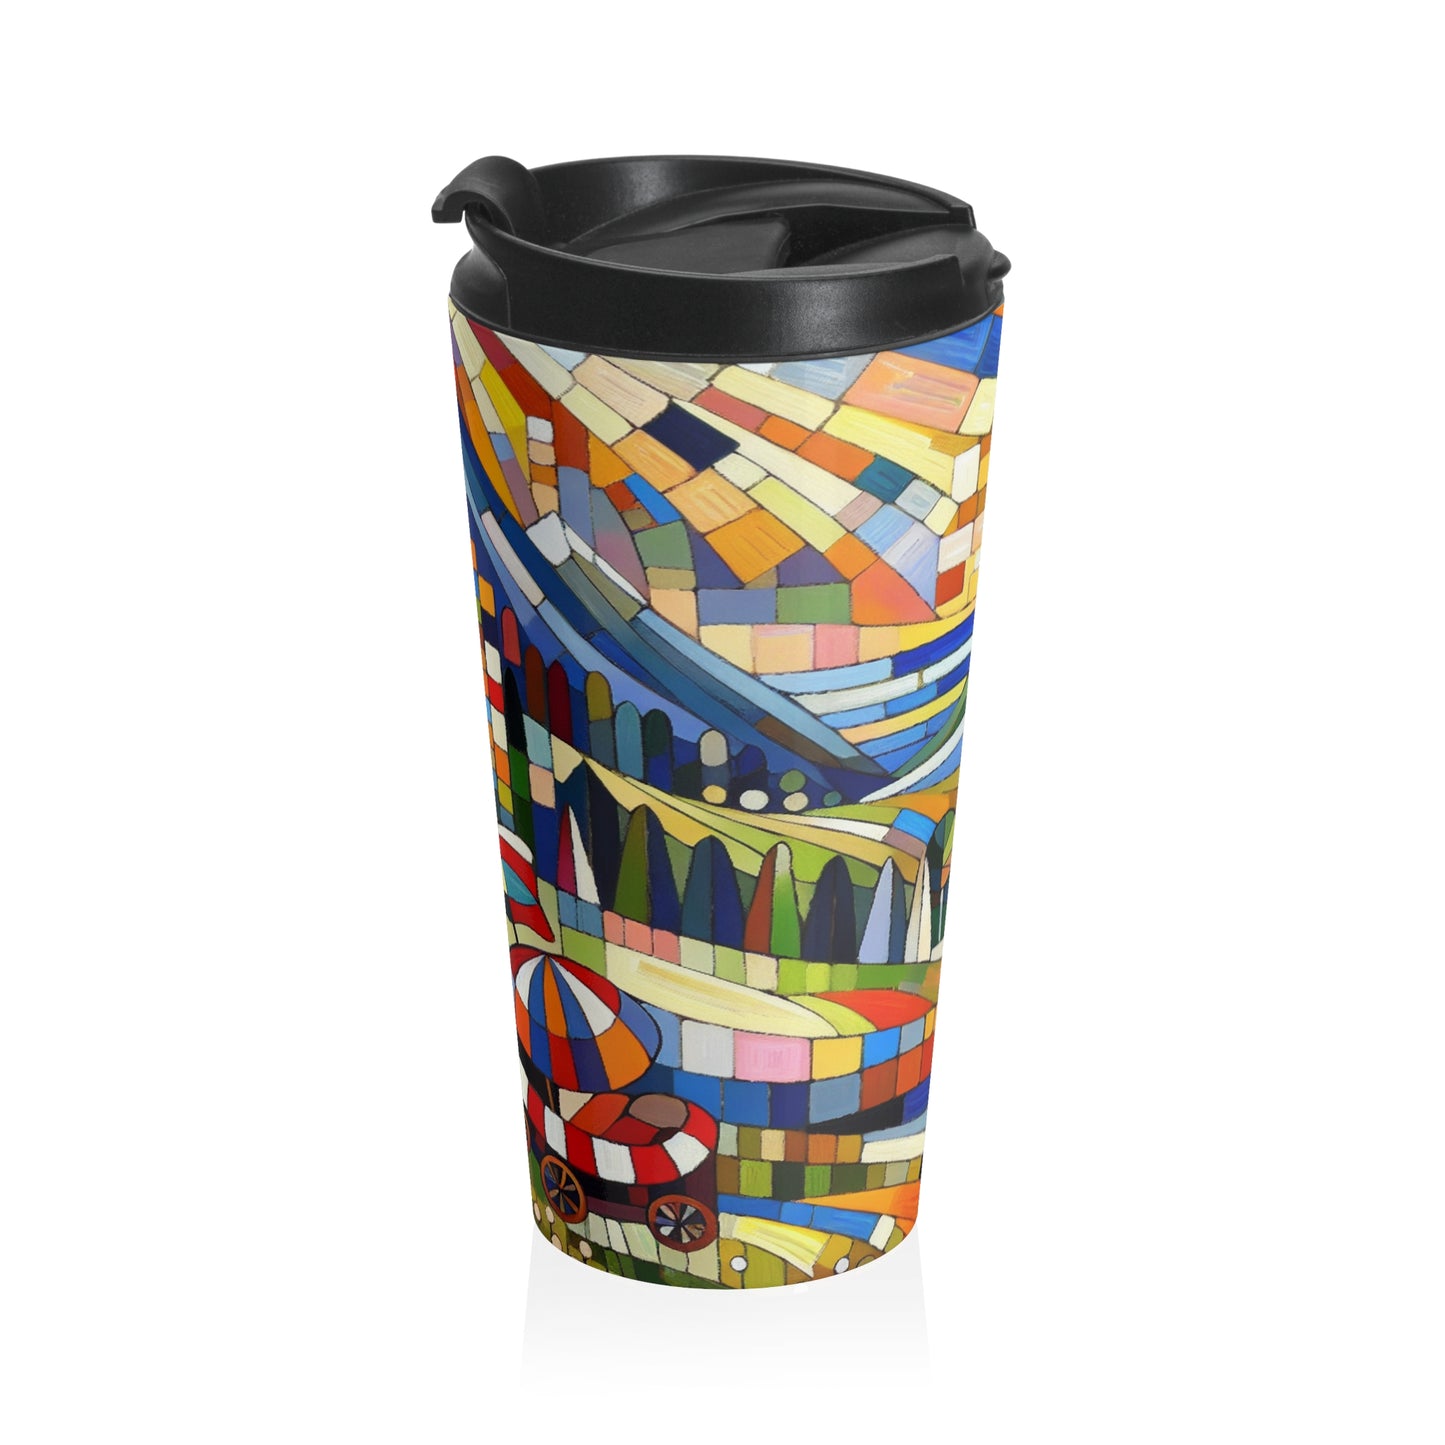 "Picnic Party in the Meadow" - The Alien Stainless Steel Travel Mug Naïve Art